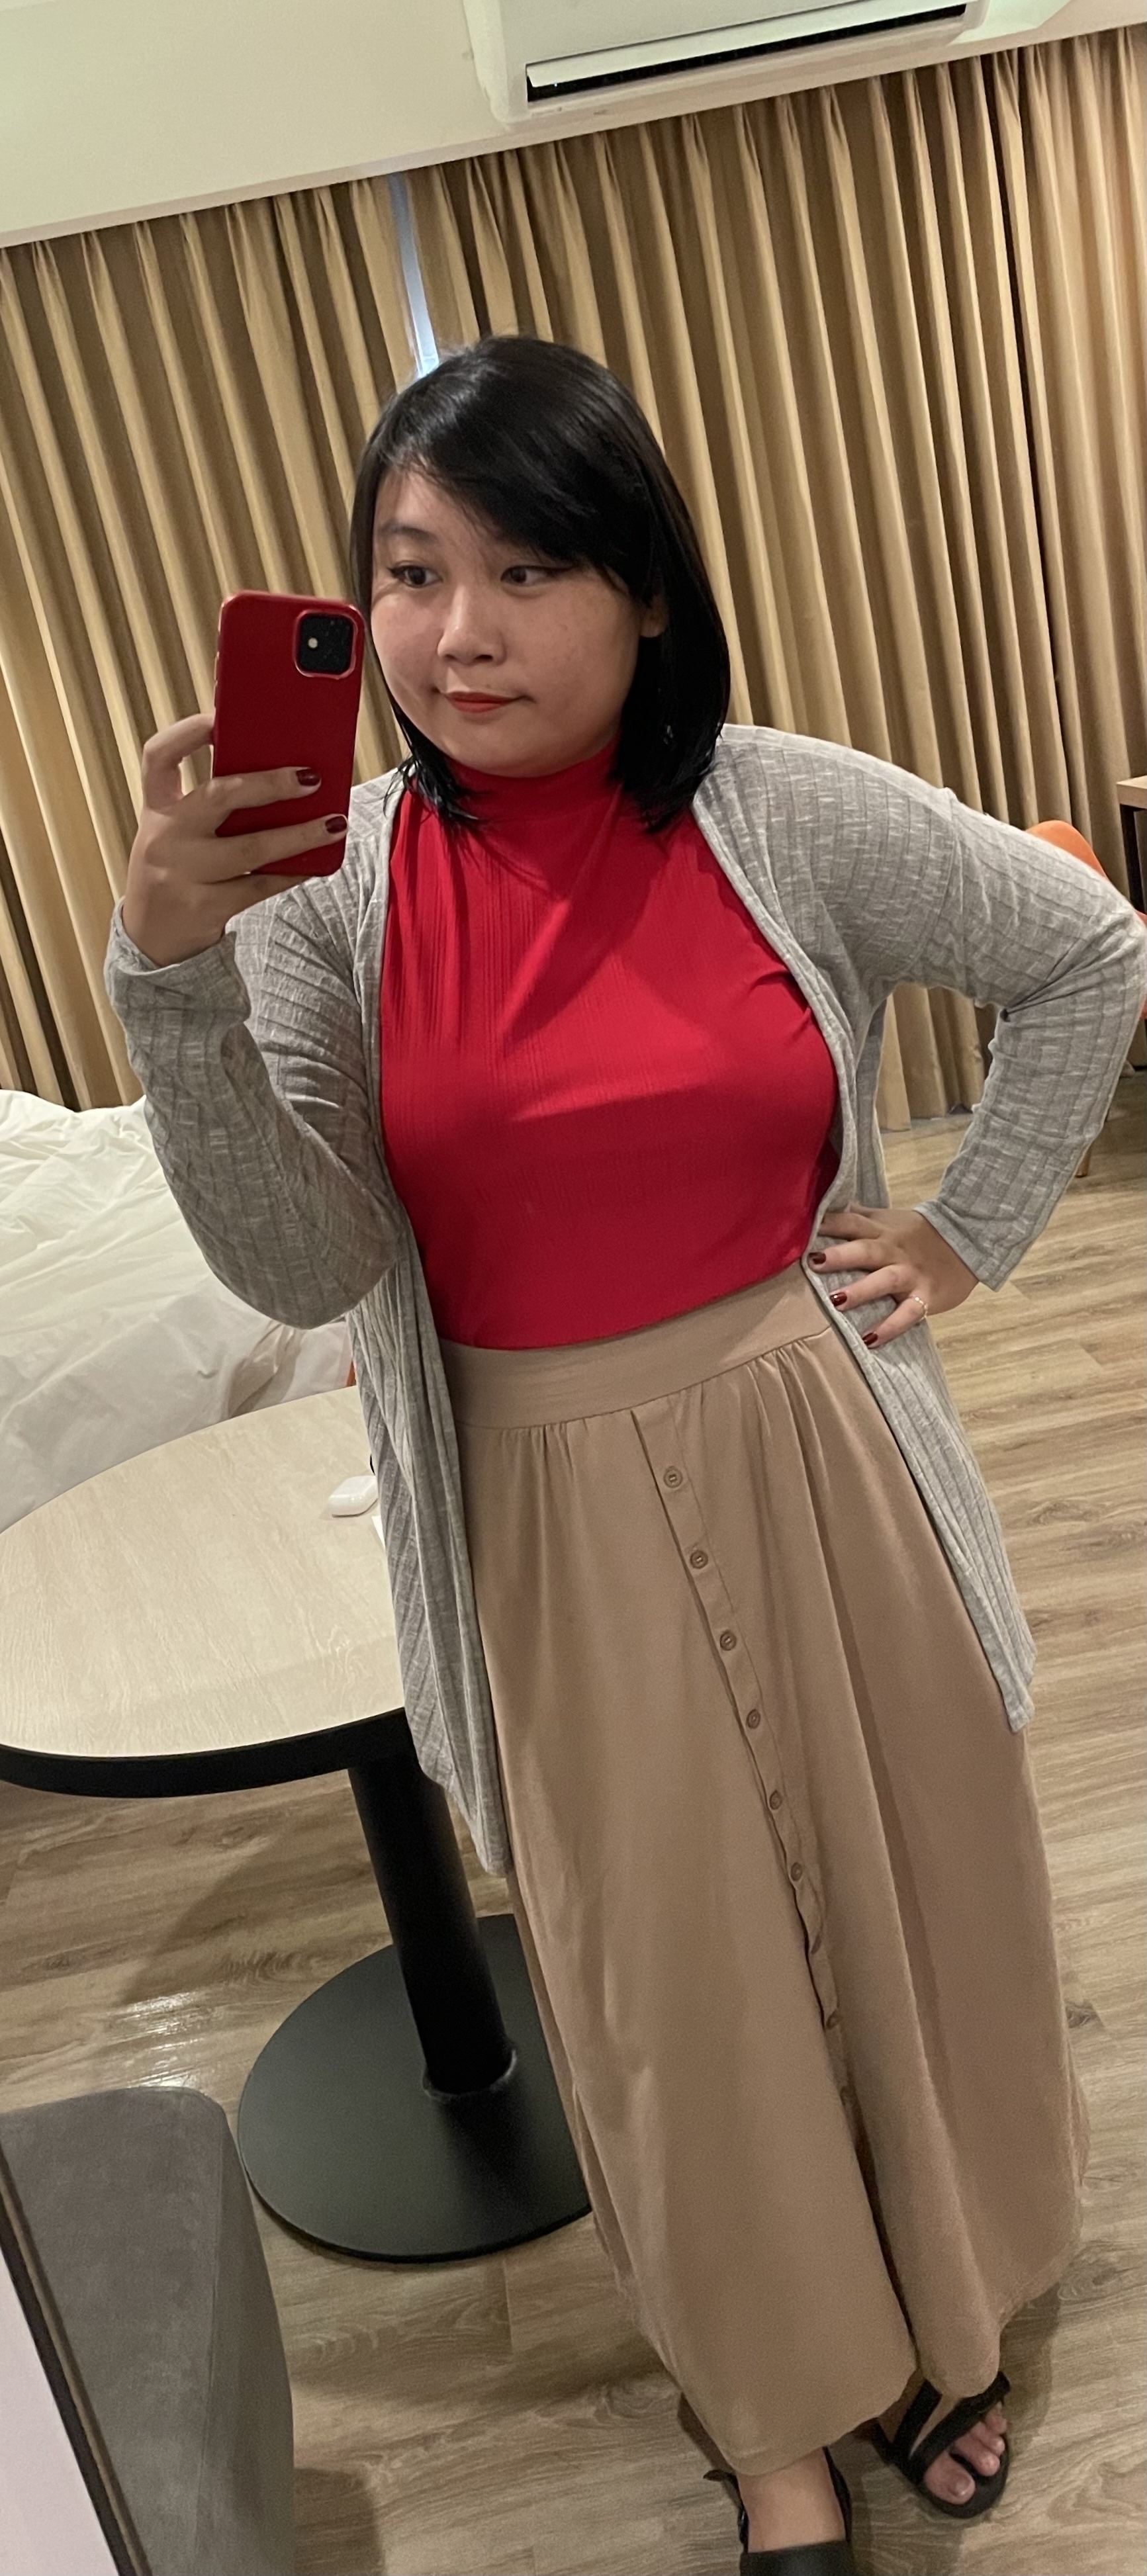 Chi's ouftit, which is a red turtleneck sheer top tucked in her long beige skirt, and with a gray cardigan and black sandals. She's also wearing her signature makeup look, which is cat eye eyeliner and red lipstick.